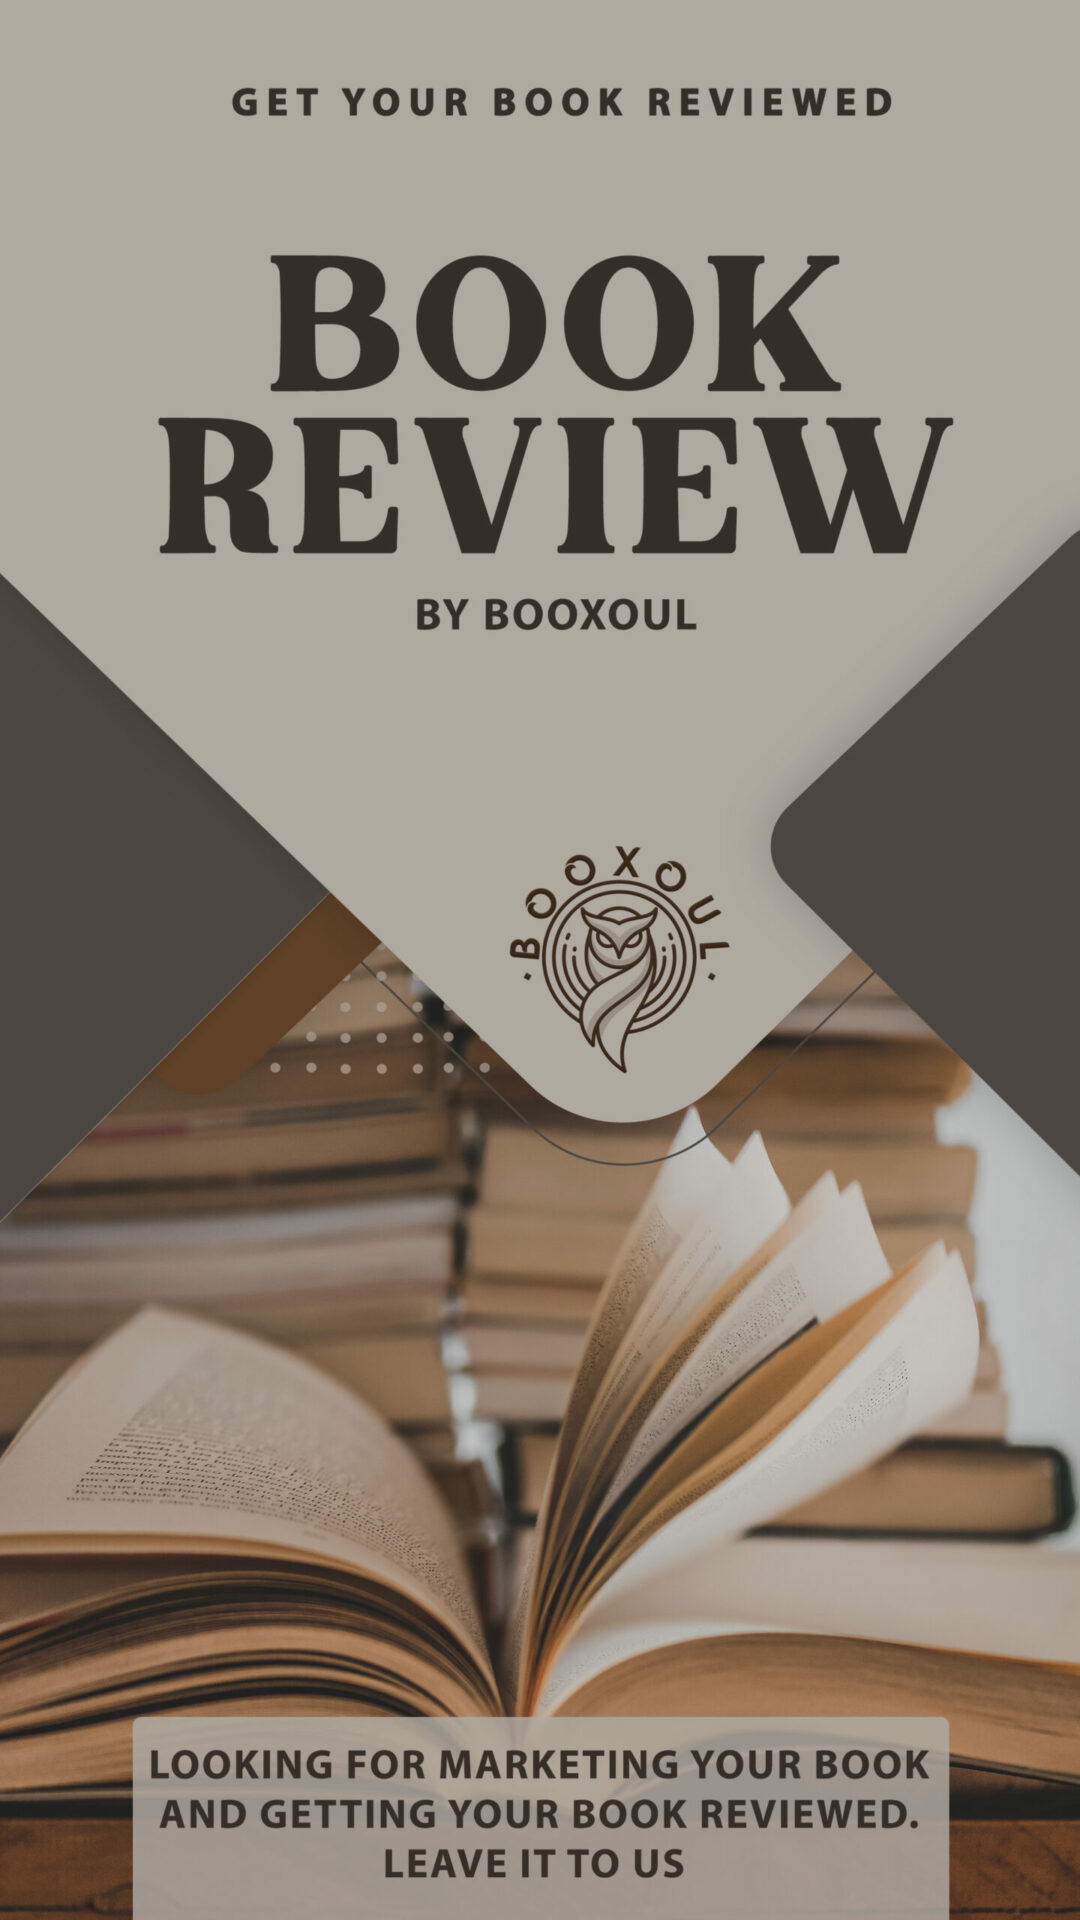 How to get book reviewed